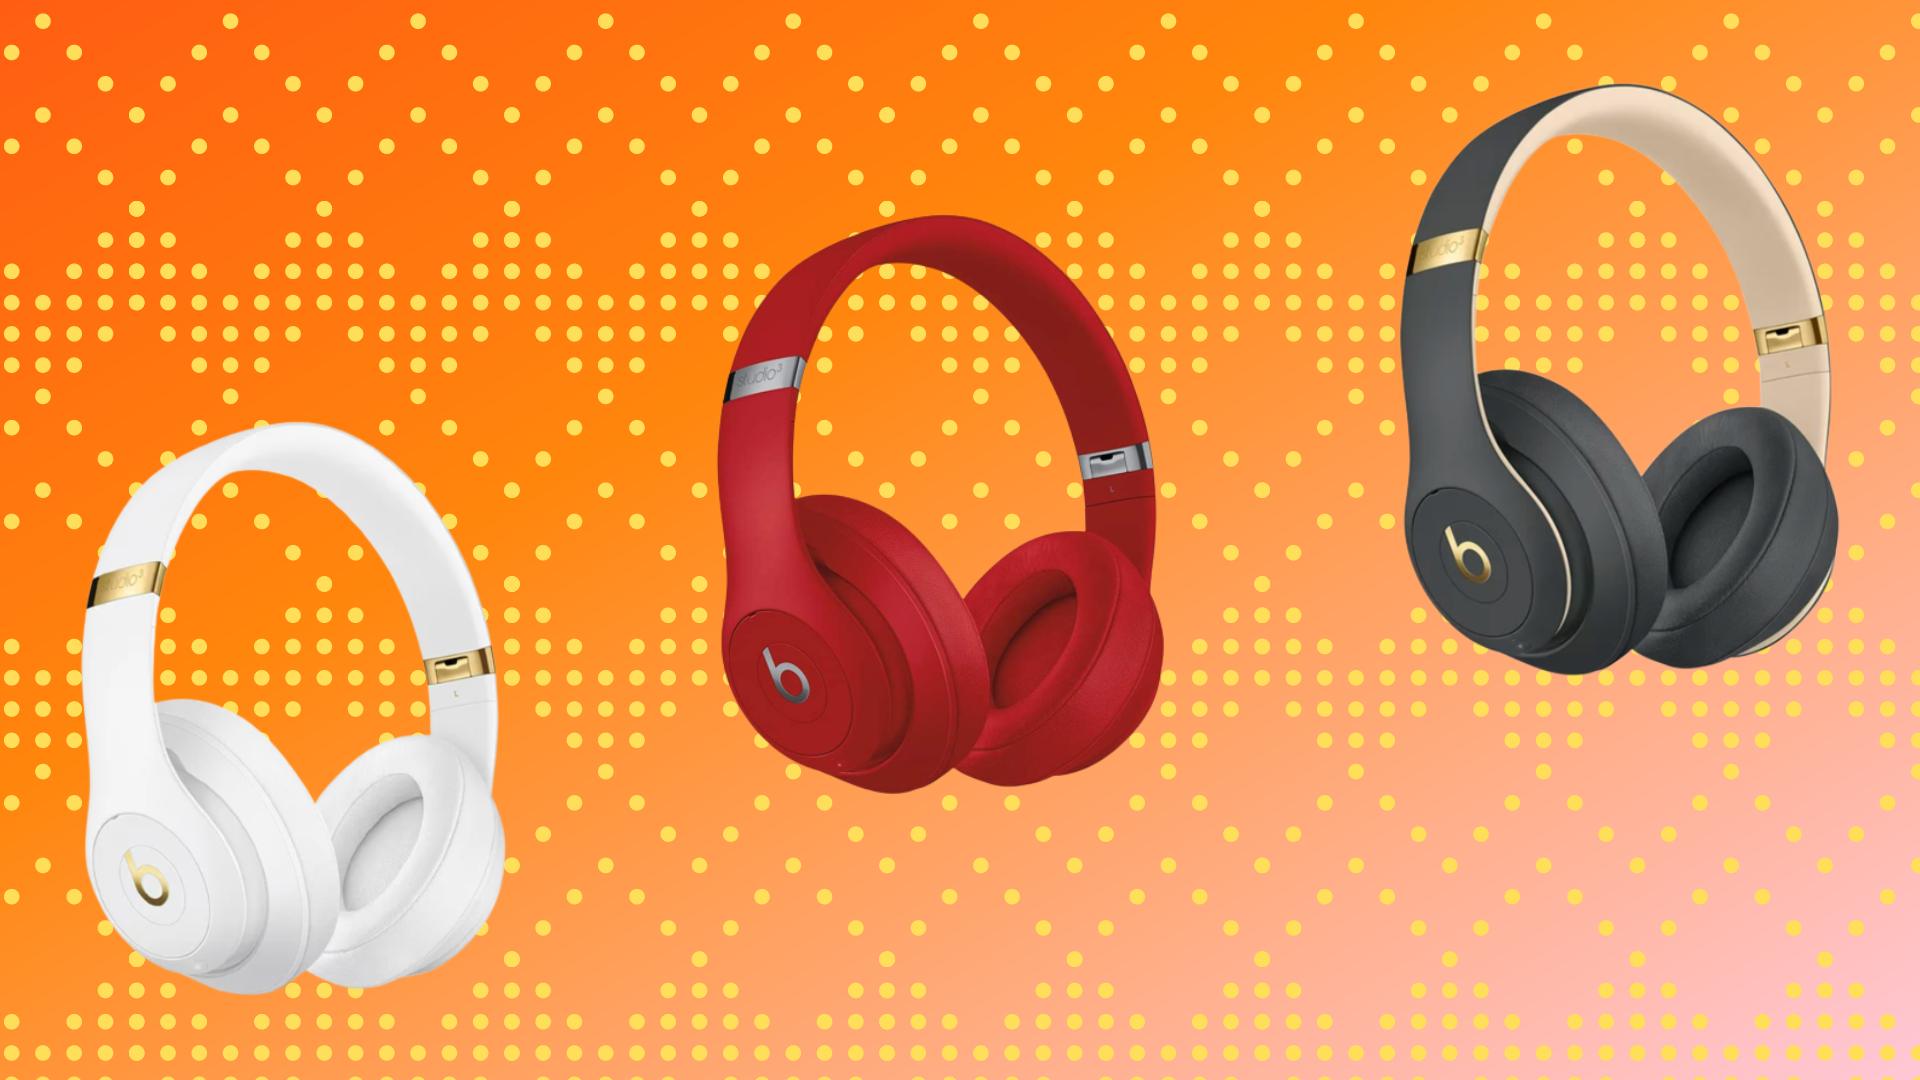 white, red, and black beats headphones against orange background with yellow dots